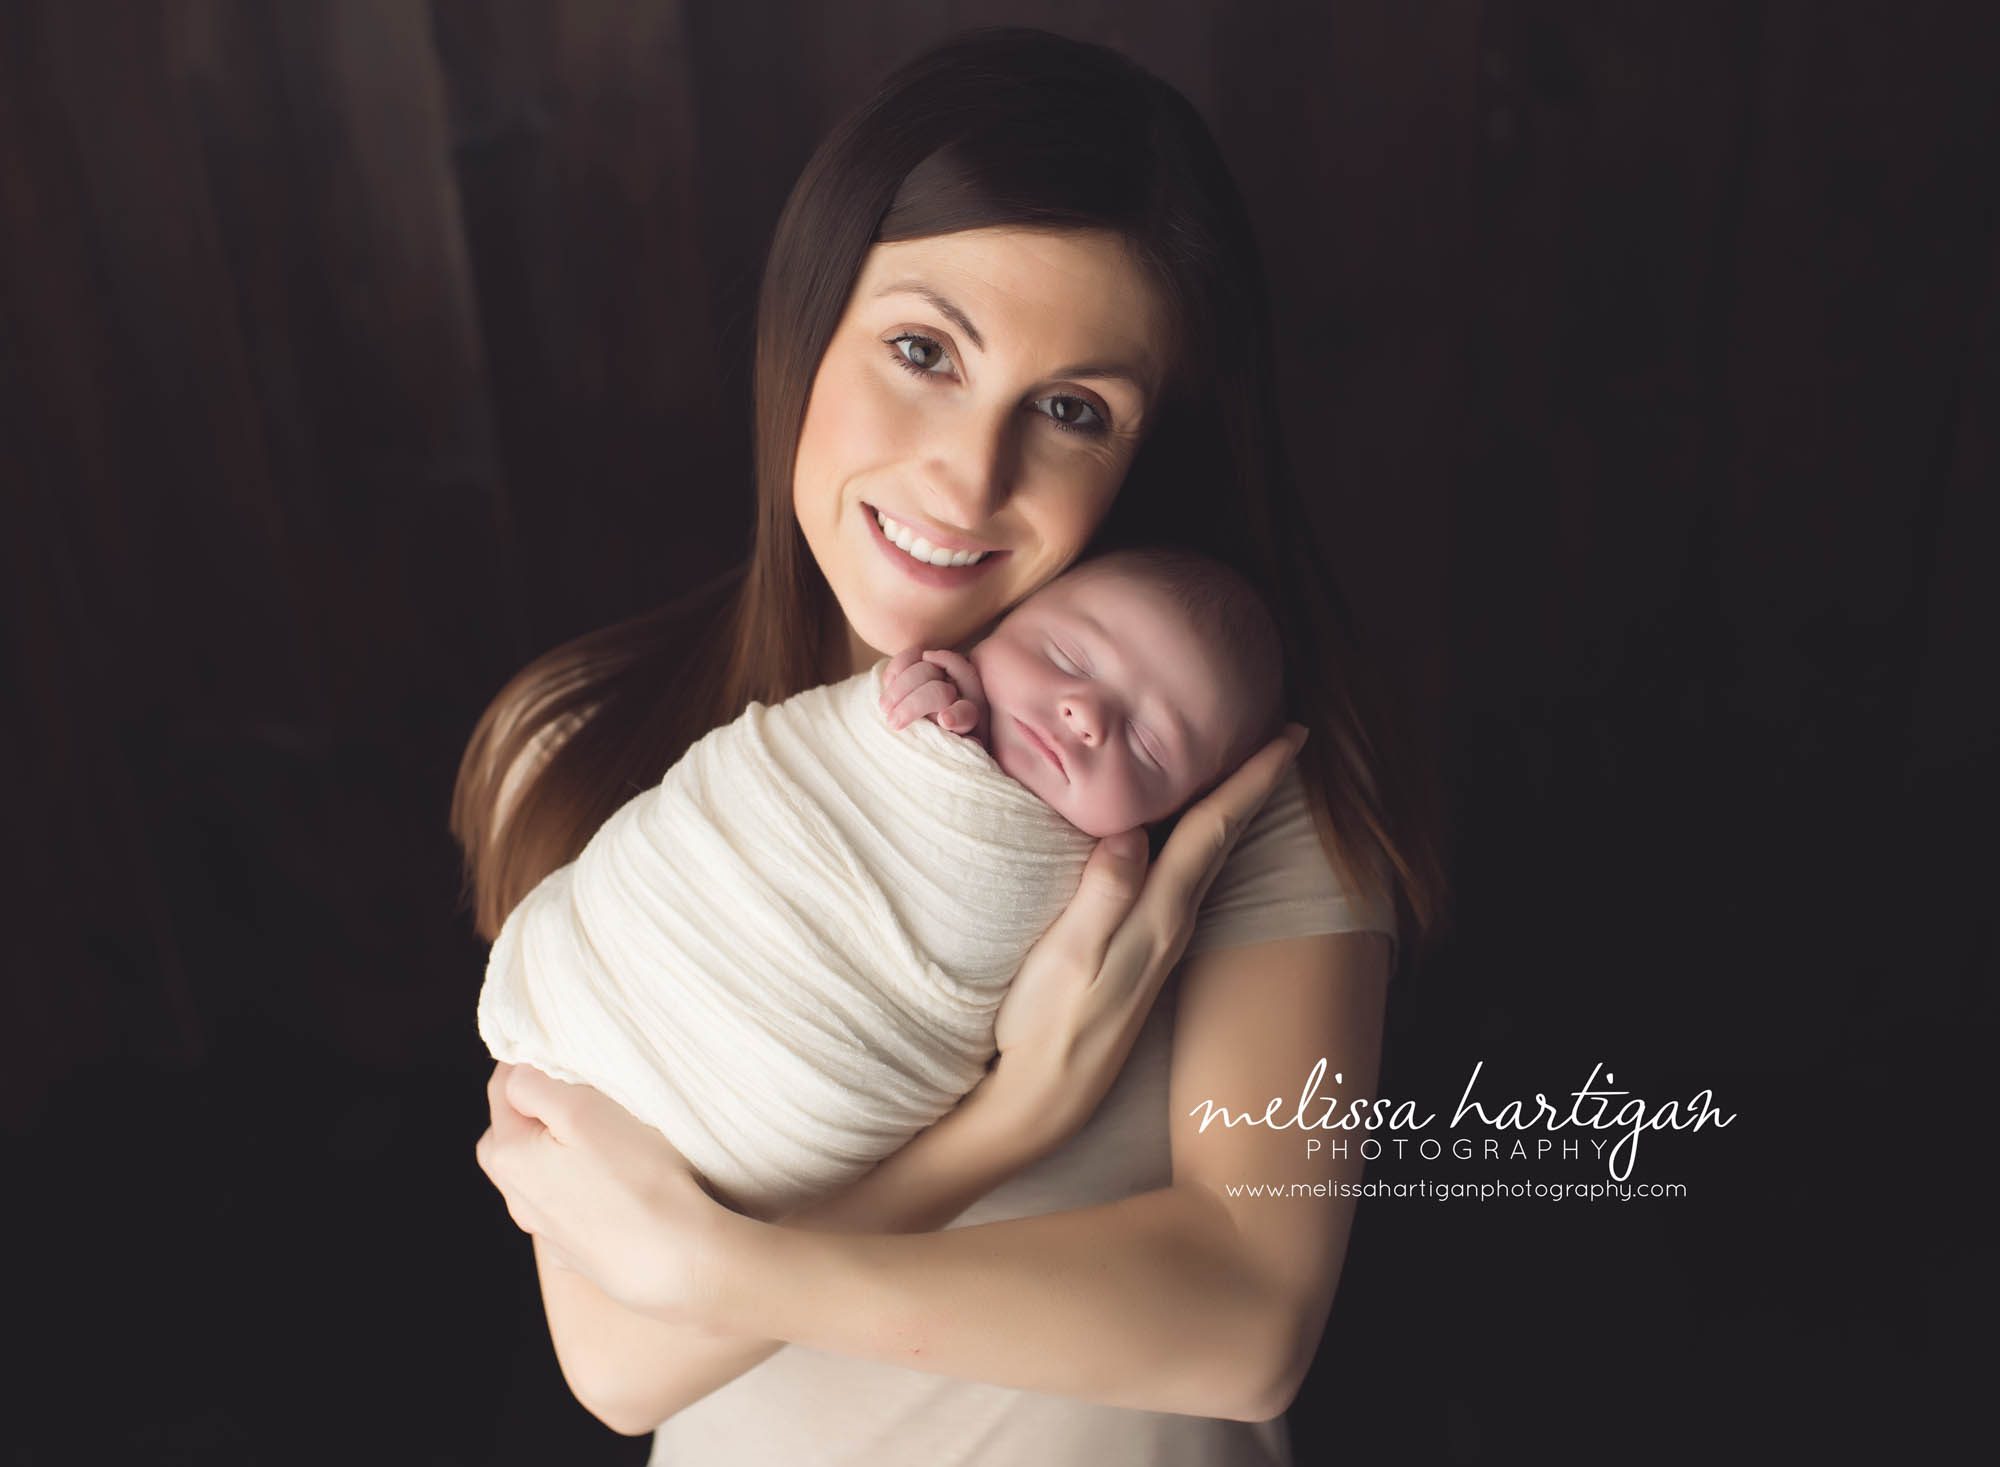 Melissa Hartigan Photography Coventry CT Newborn & Maternity Photographer Coventry CT Maternity Newborn Session Chase sleeping wrapped in cream held by mom